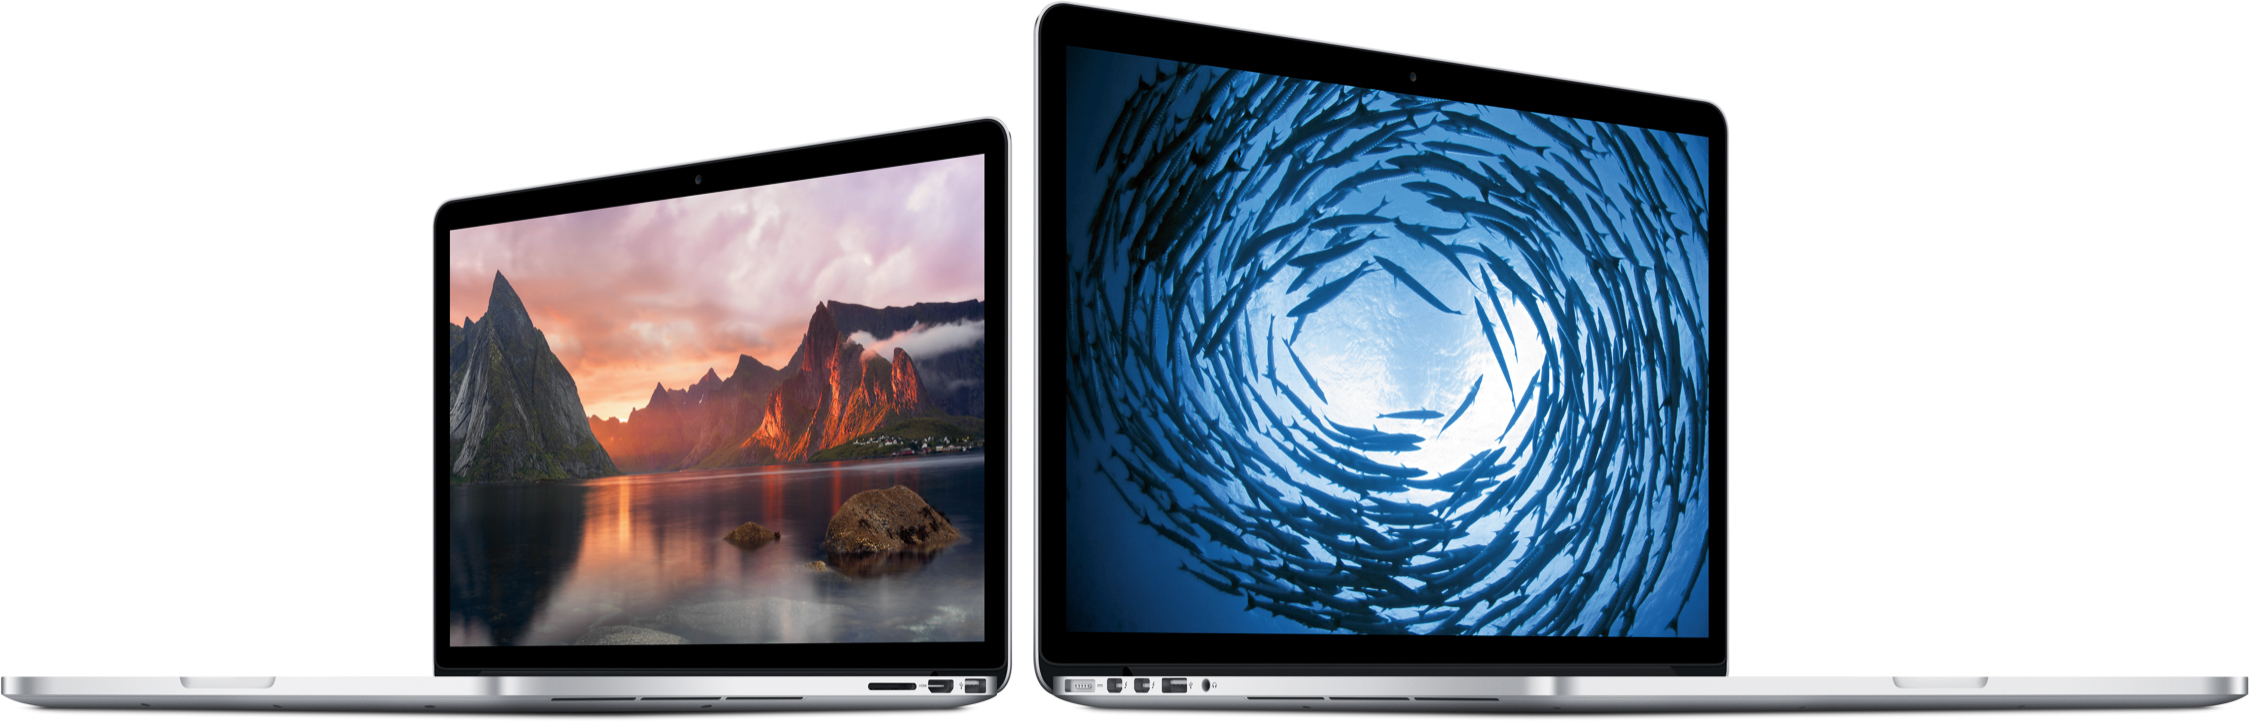 Apple releases fix for flash storage problem on latest MacBooks Pro